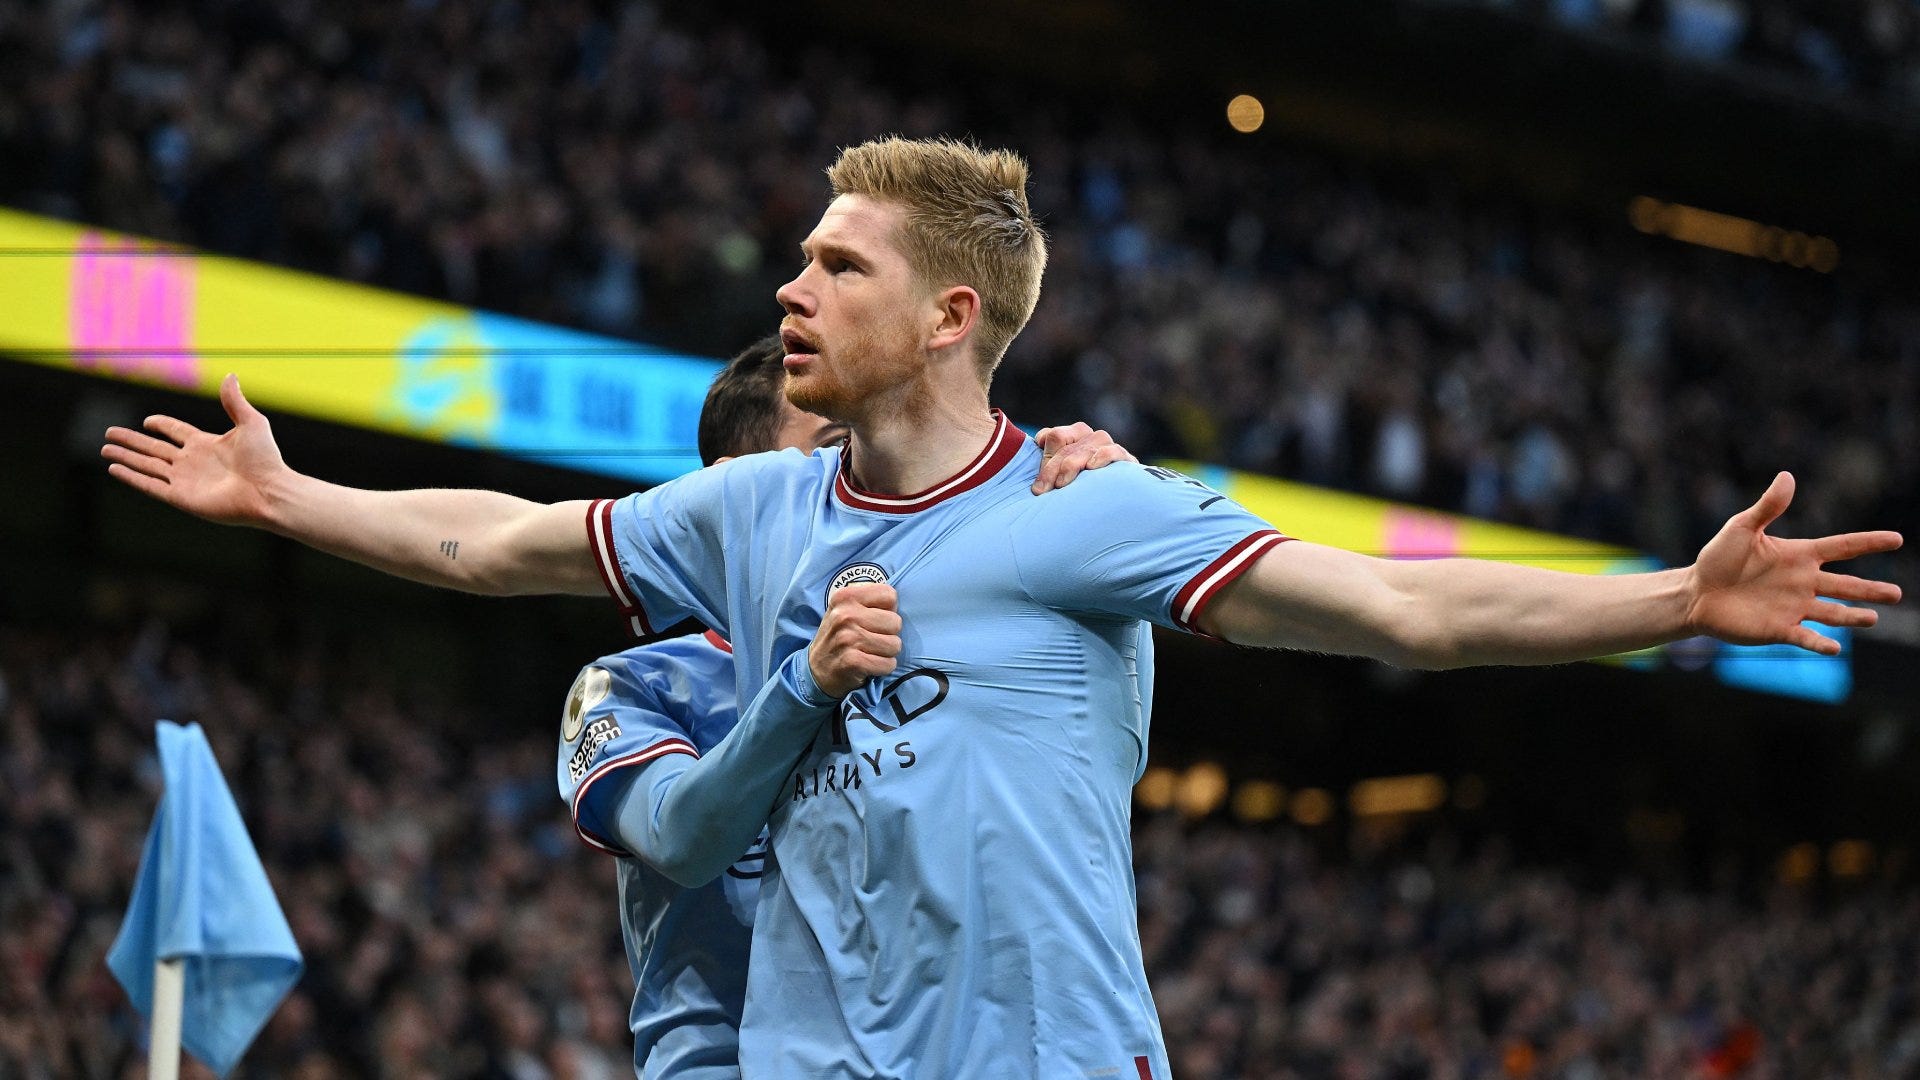 WATCH: Classic Kevin De Bruyne! Man City star lands early hammer blow ...